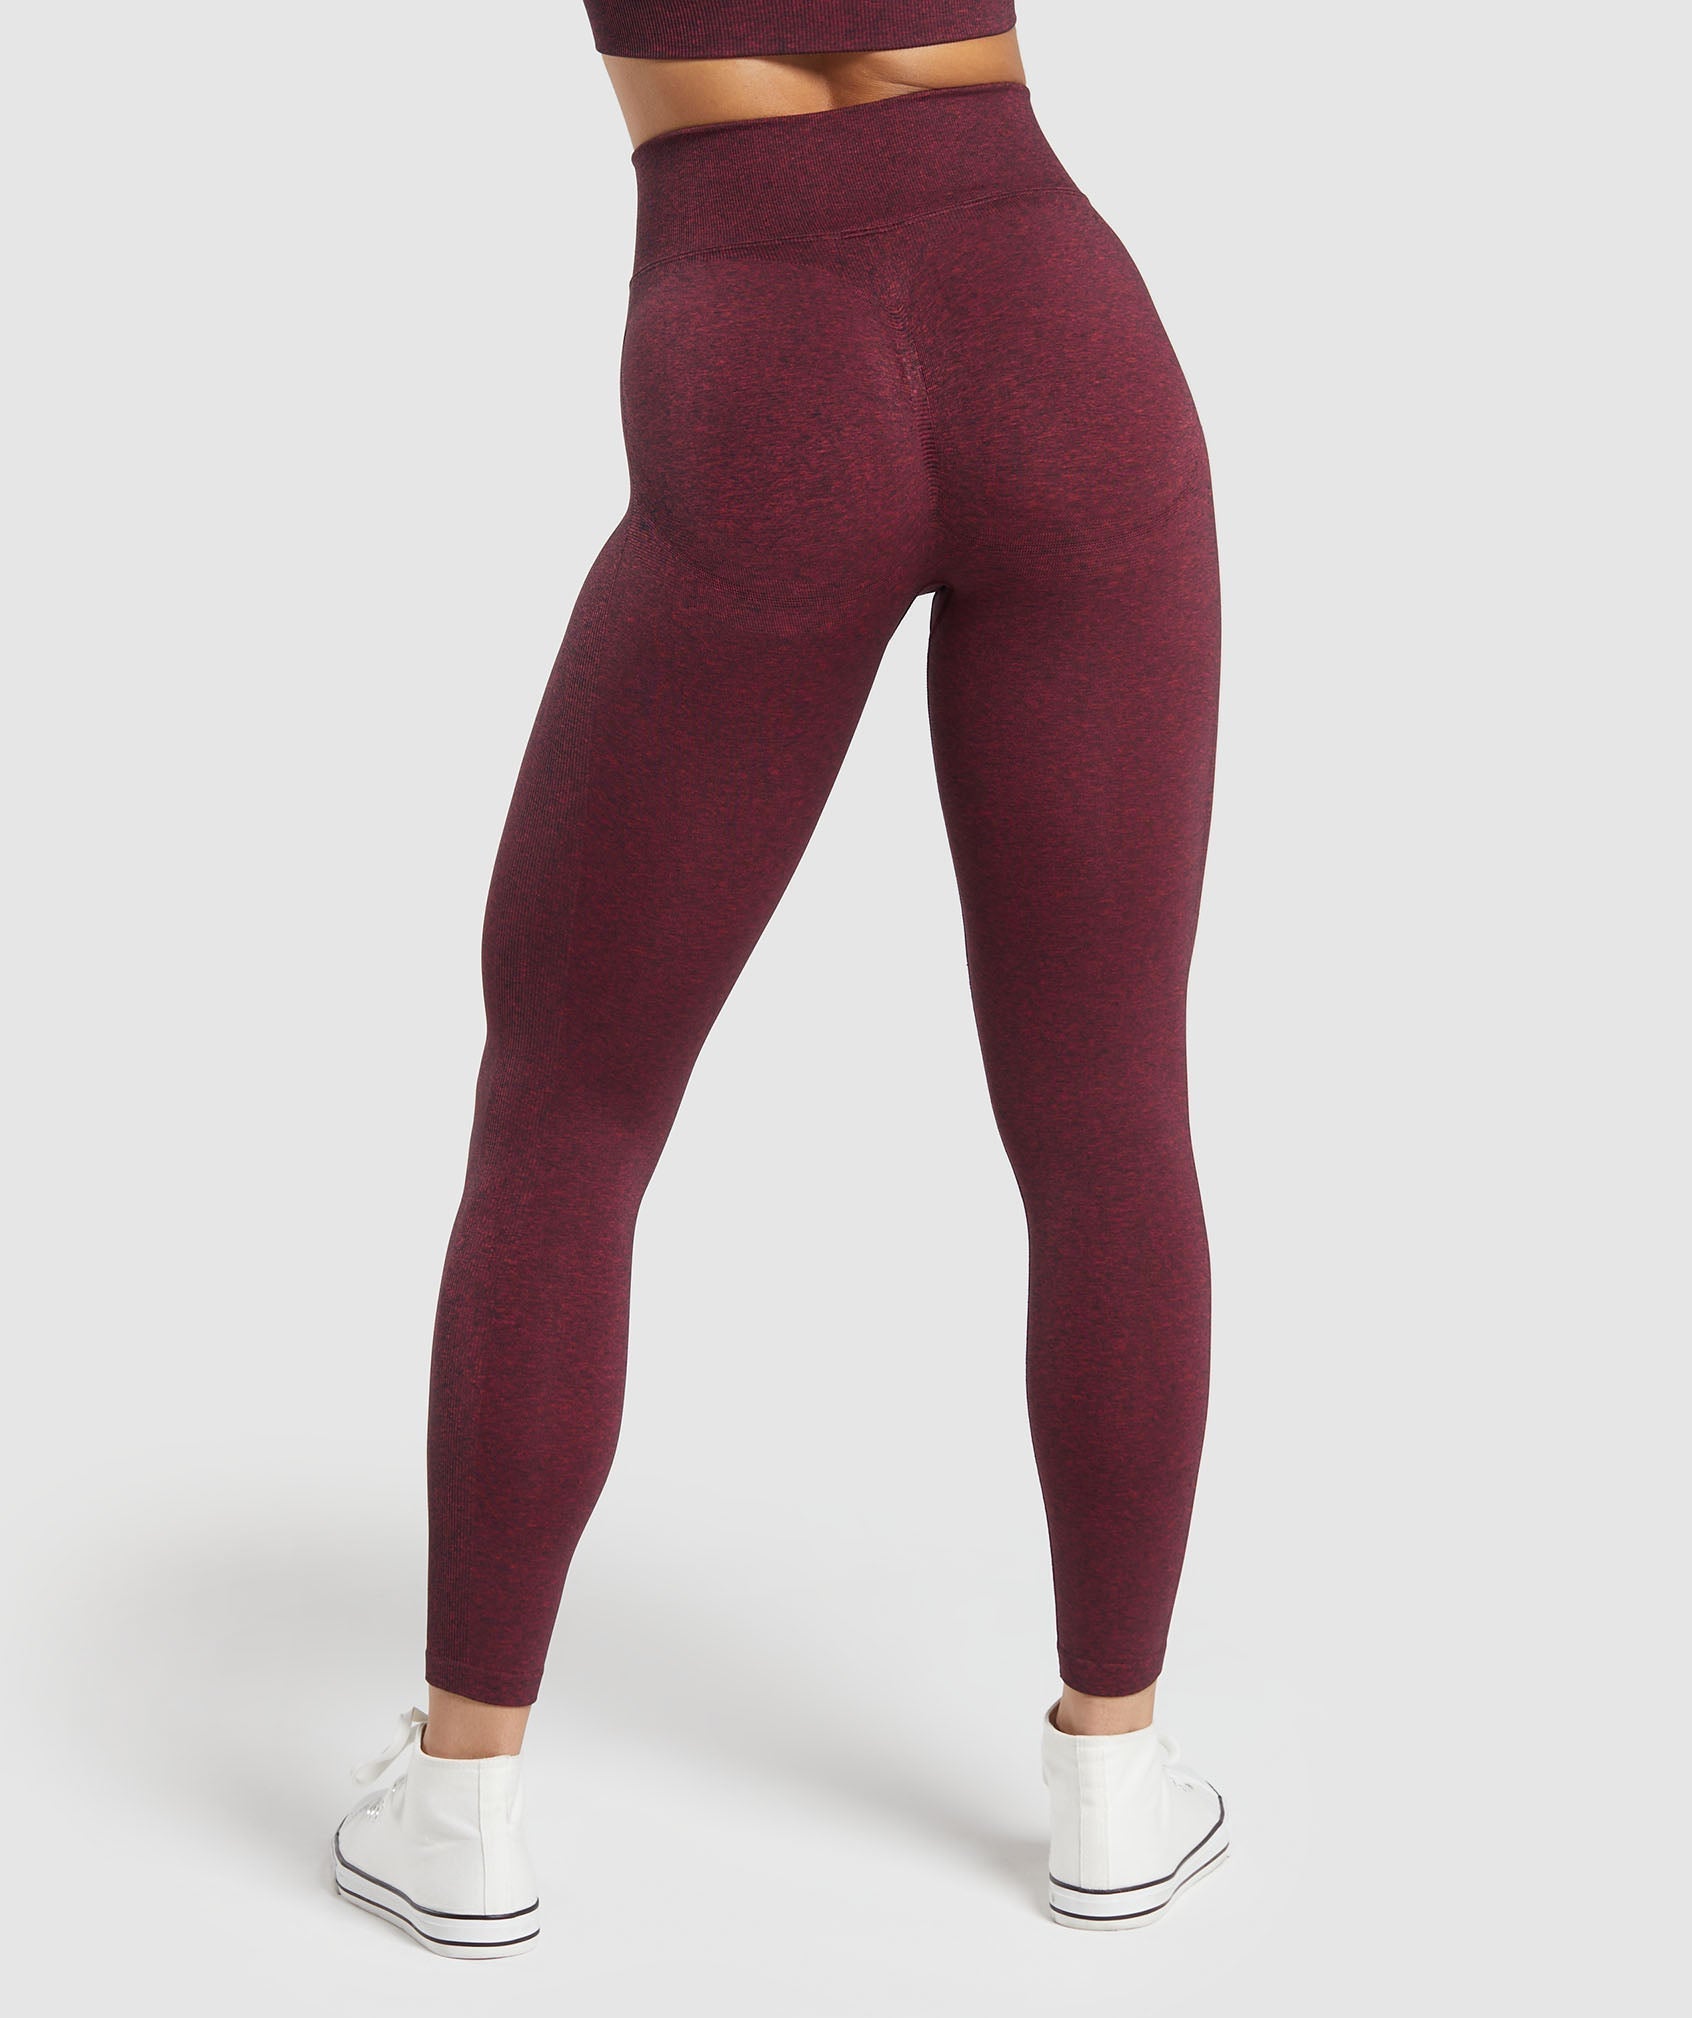 us][sell] Maroon cropped leggings, Size 8, EUC, $25 shipped : r